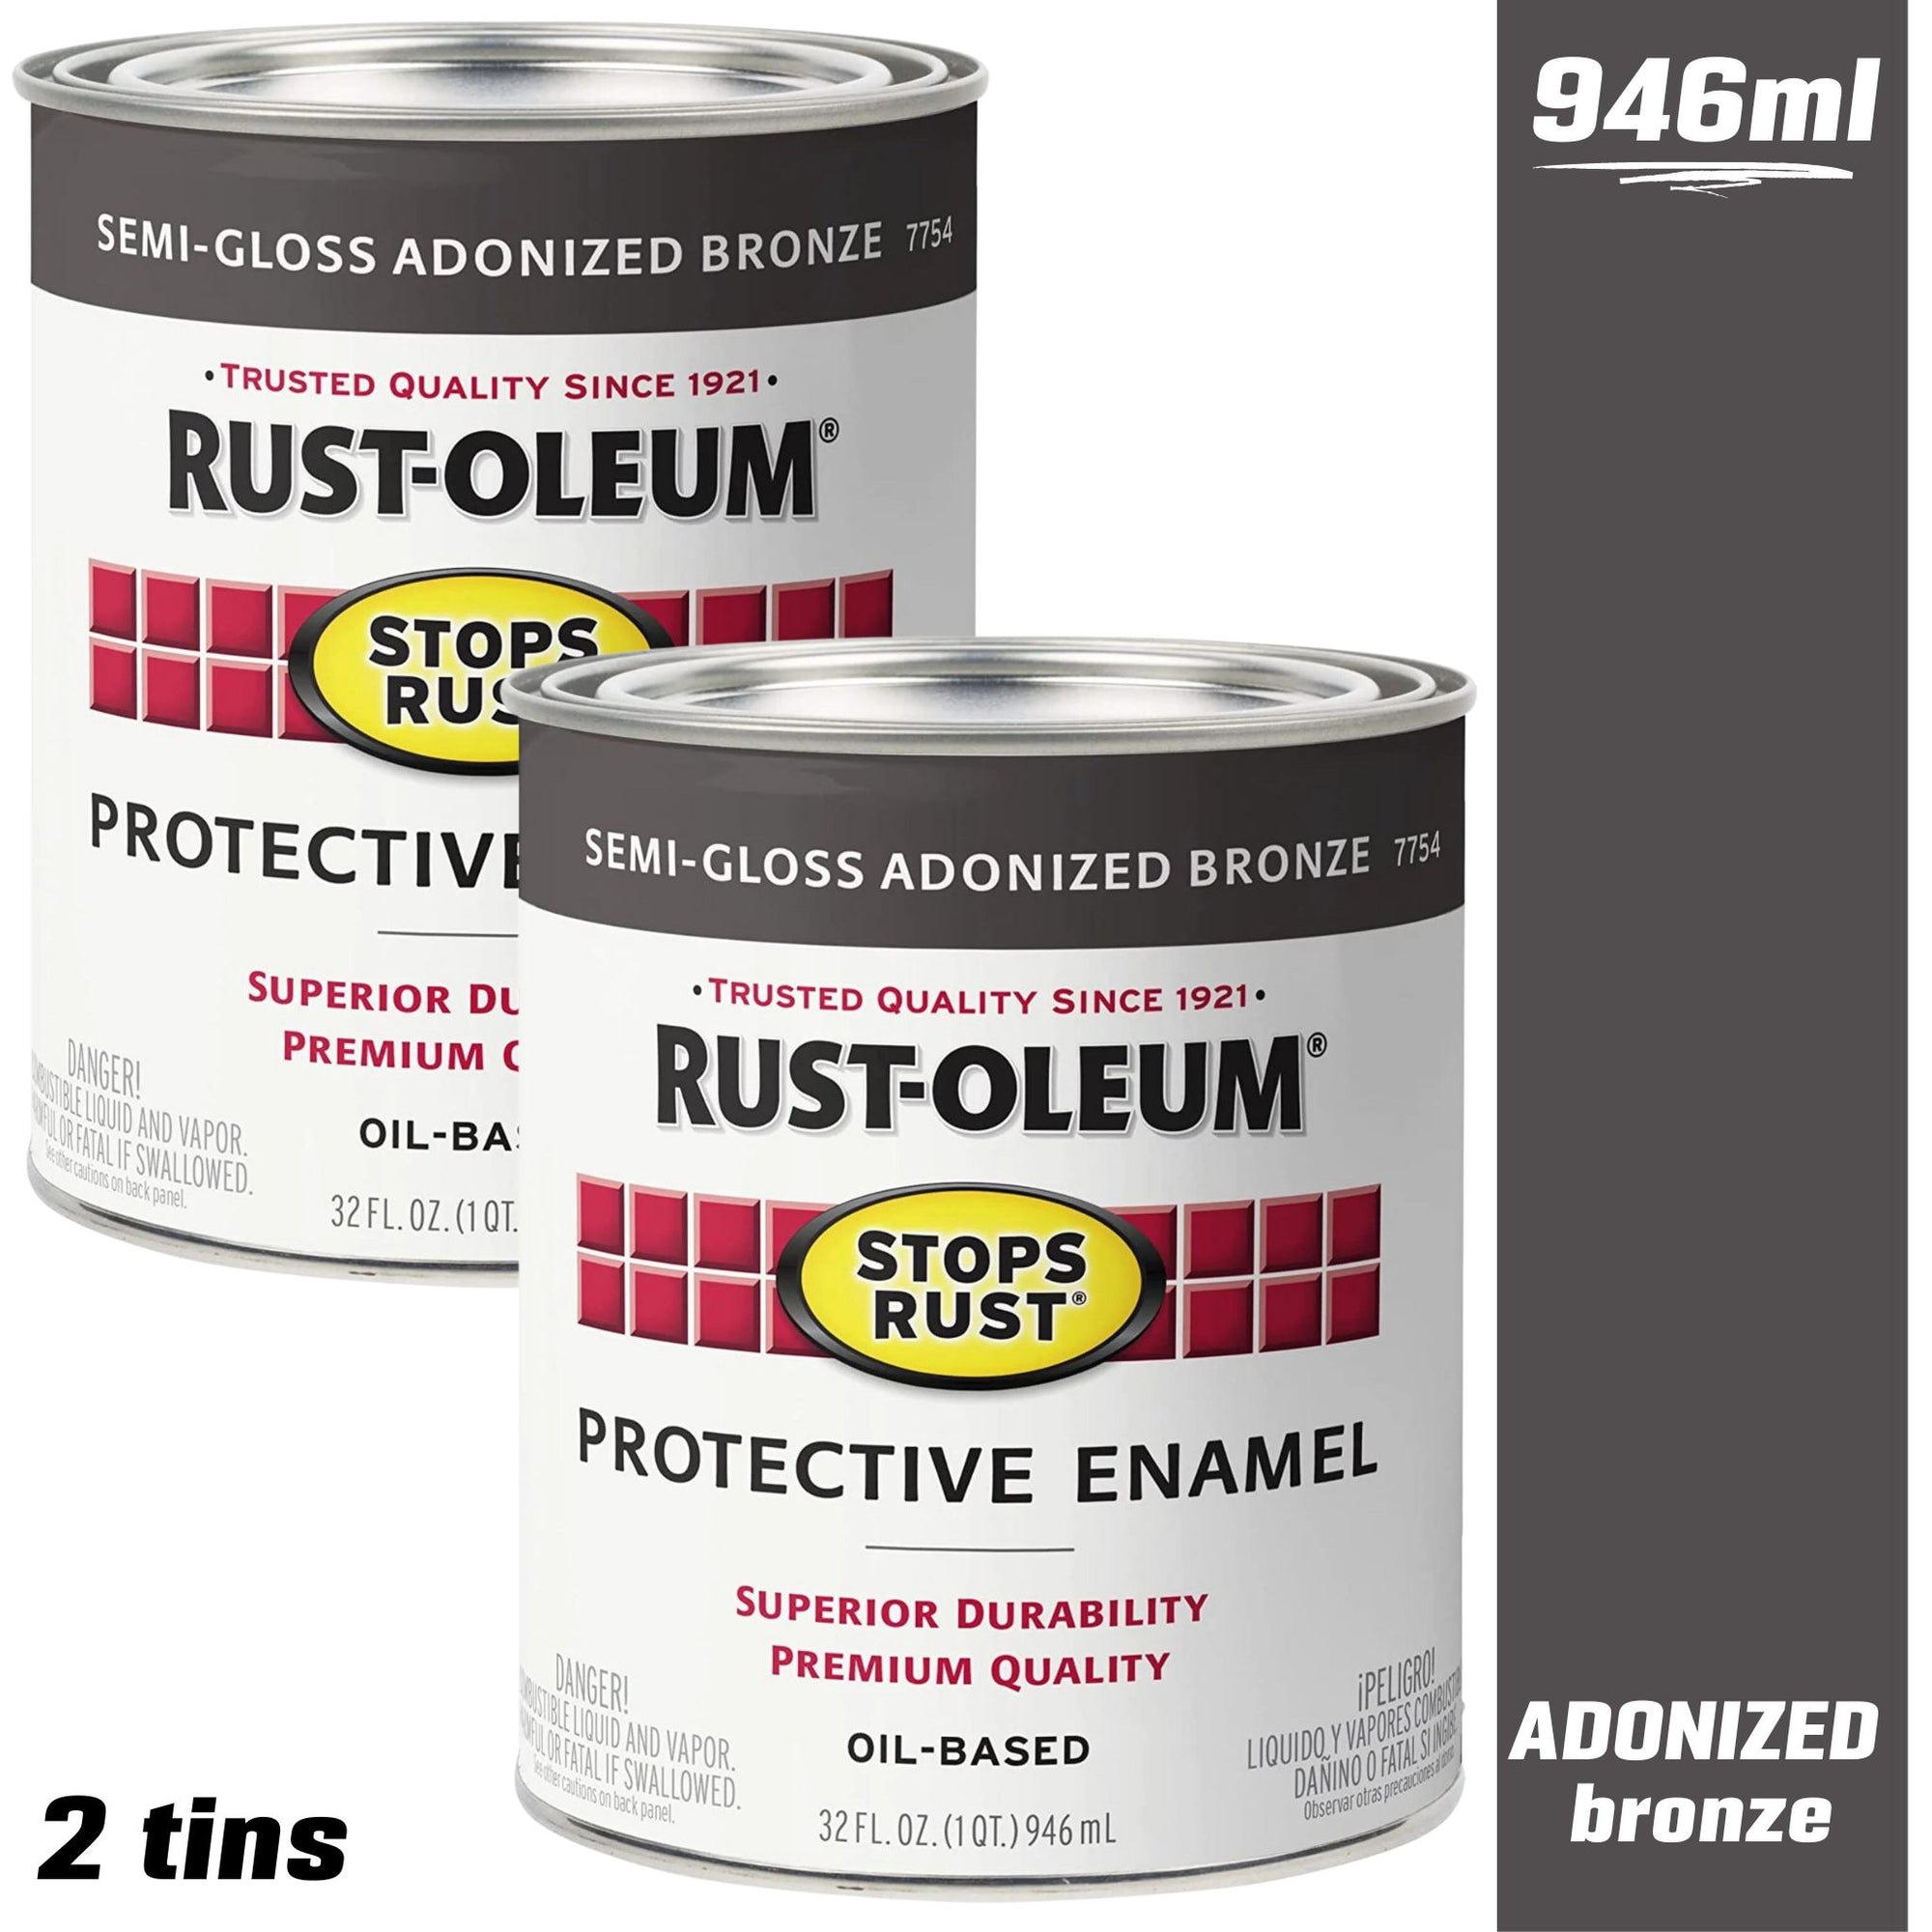 (2 TINS) Rustoleum Stops Rust SEMI-Gloss Anodized Bronze - Quart 946mL | 7754502 - South East Clearance Centre